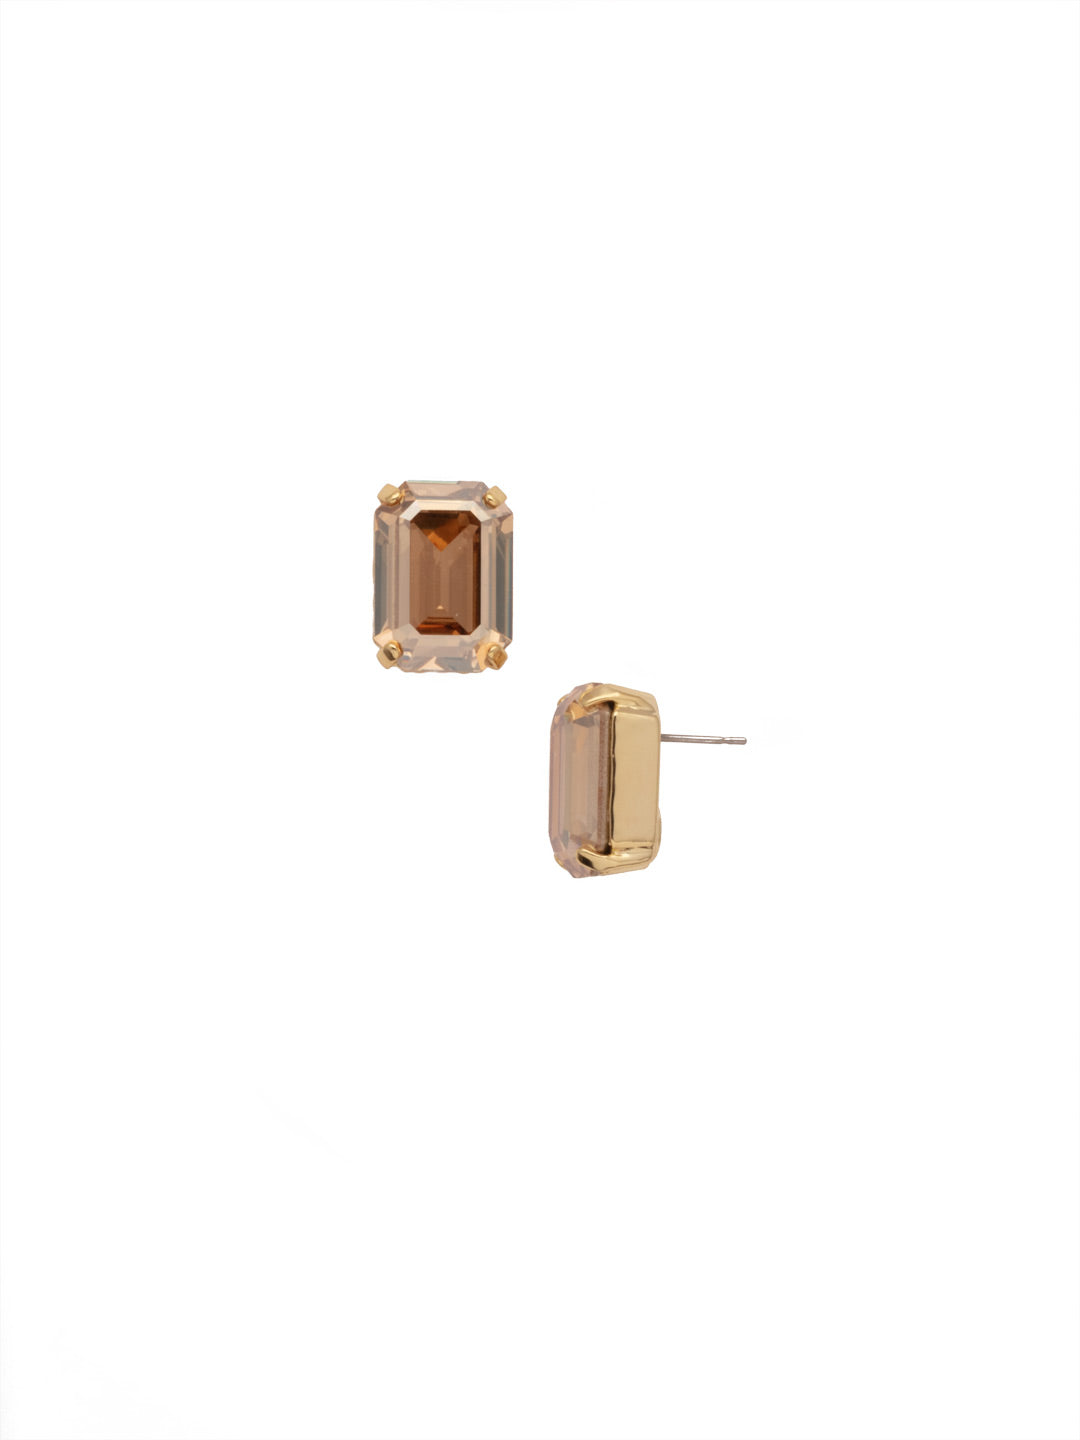 Brynn Stud Earrings - EBY44BGRSU - <p>The Brynn Stud Earrings can be worn alone or paired with a fabulous statement necklace for some added sparkle to any outfit. From Sorrelli's Raw Sugar collection in our Bright Gold-tone finish.</p>